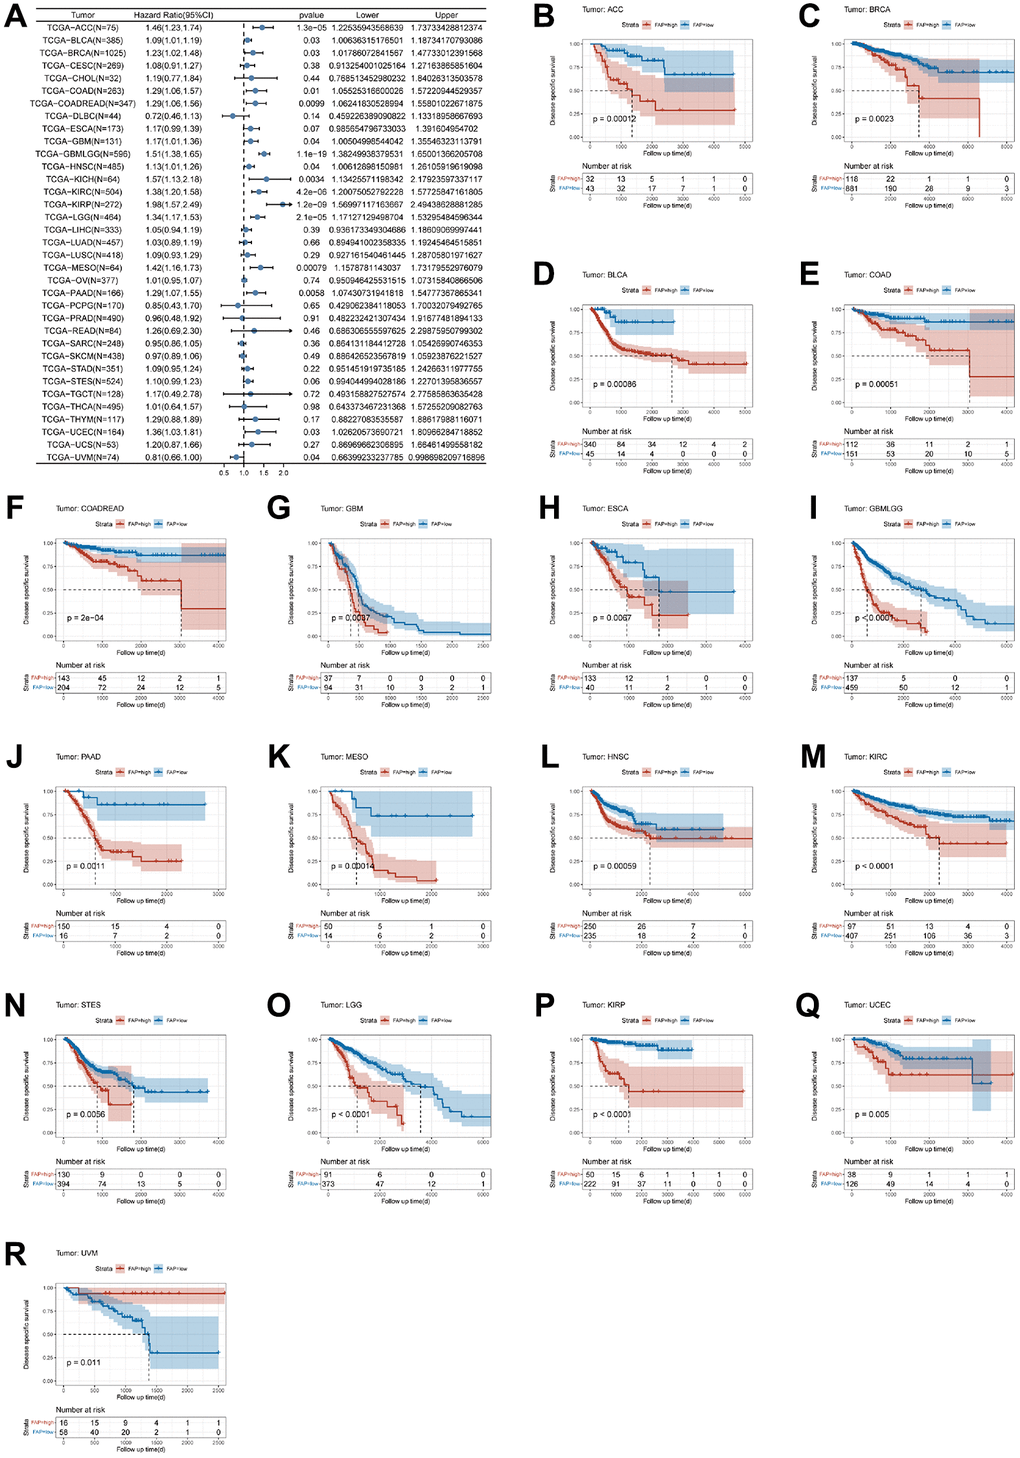 Association between FAP expression levels and disease-specific survival (DSS). (A) Forest plot of association of FAP expression and DSS in pan-cancer. (B–R) Kaplan-Meier analysis of the association between FAP expression and DSS.